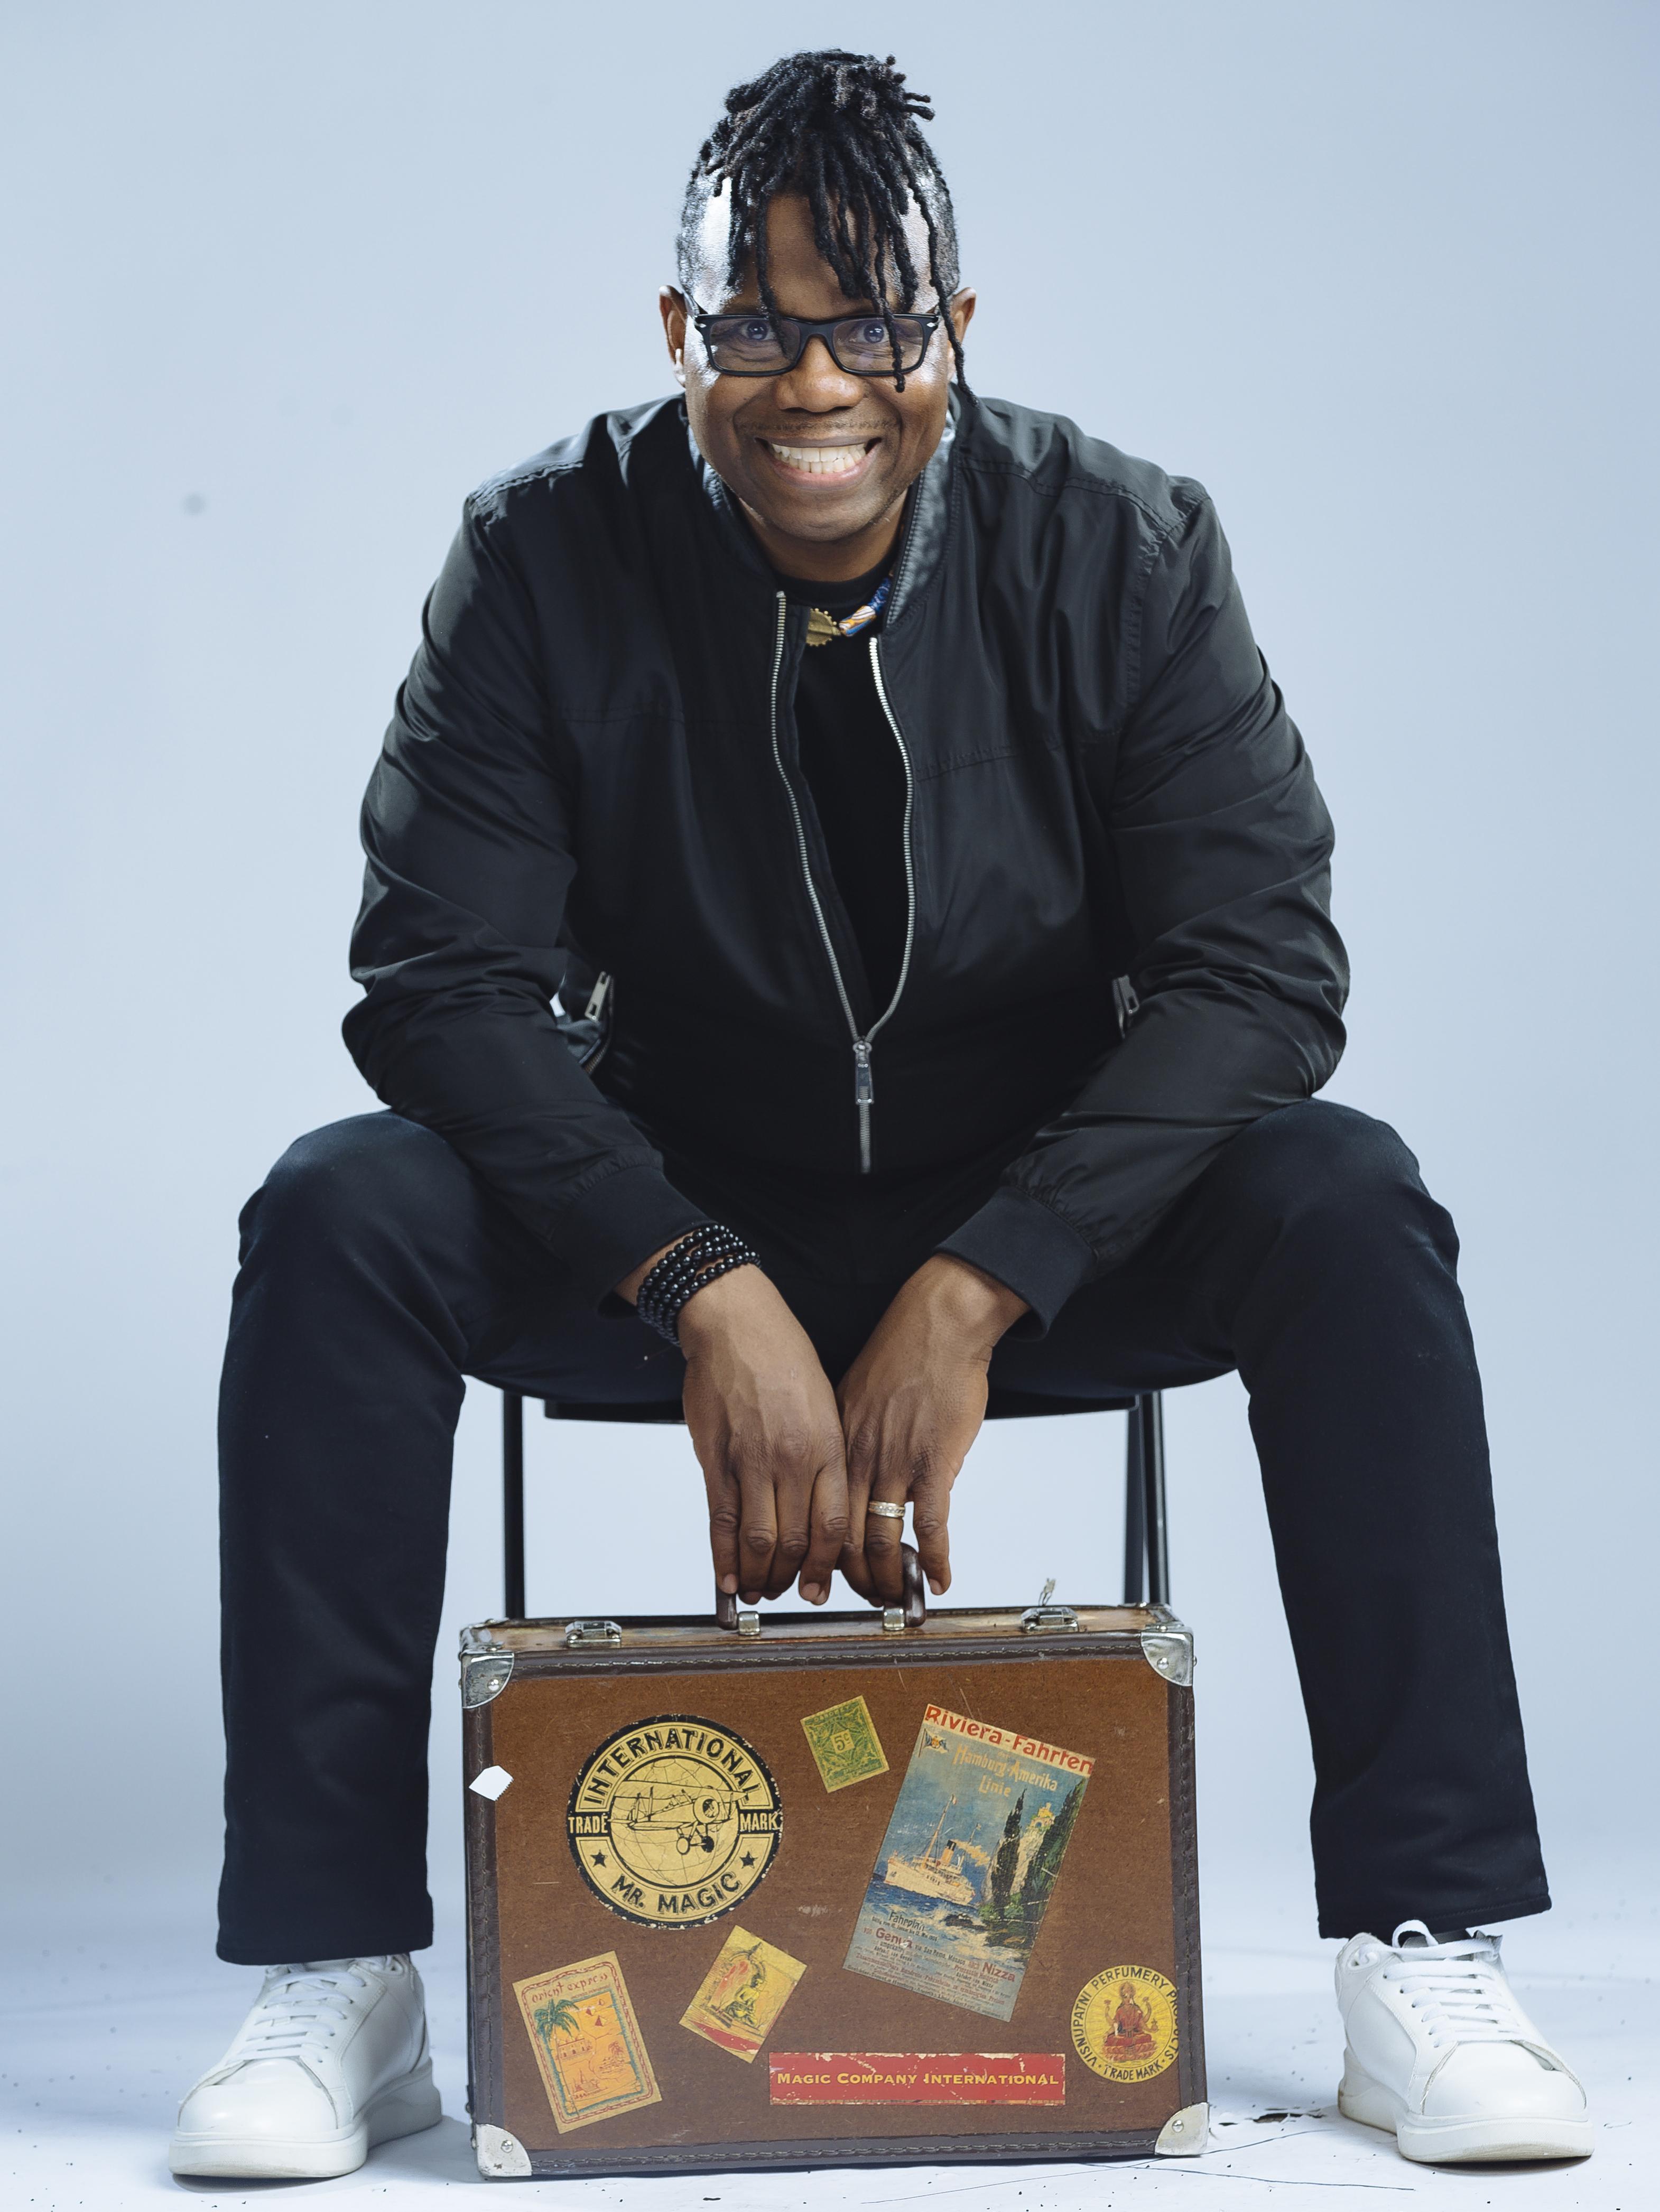 The next installment of the I Am Oz Diversity Speaker Series will feature magician Ran'd Shine at 6 p.m. on Wednesday, April 24, in the Marano Campus Center auditorium (room 132).